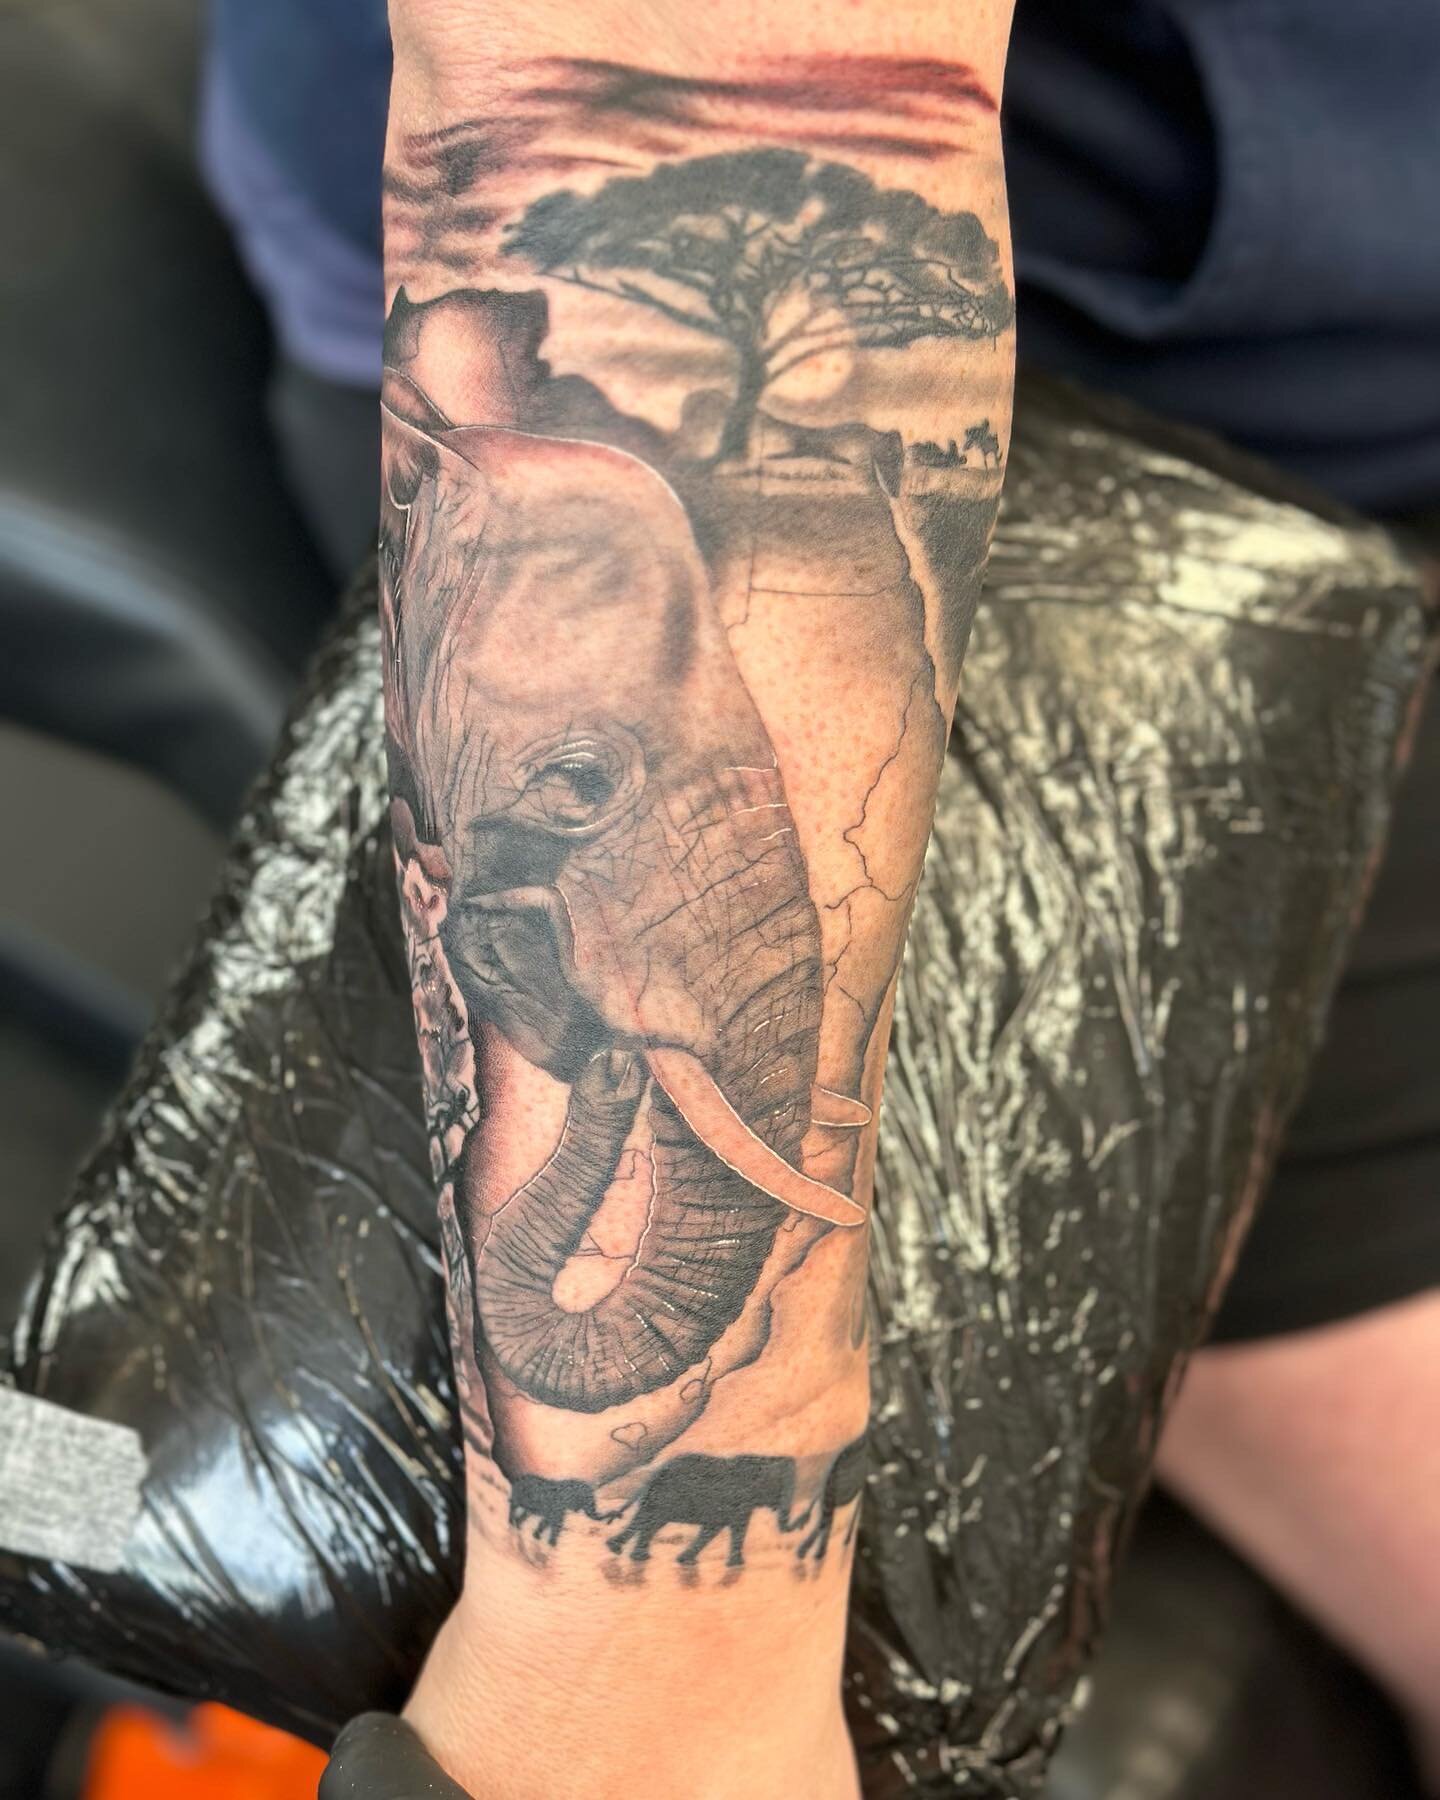 Really lovely for Heidi to add to the lions She did for Adam a few years ago. Good to see them settled in so nicely. #lthirteenfamily #lthirteenuk #teignmouth #bishopwandshader #dynamicgreywash #dynamictripleblack